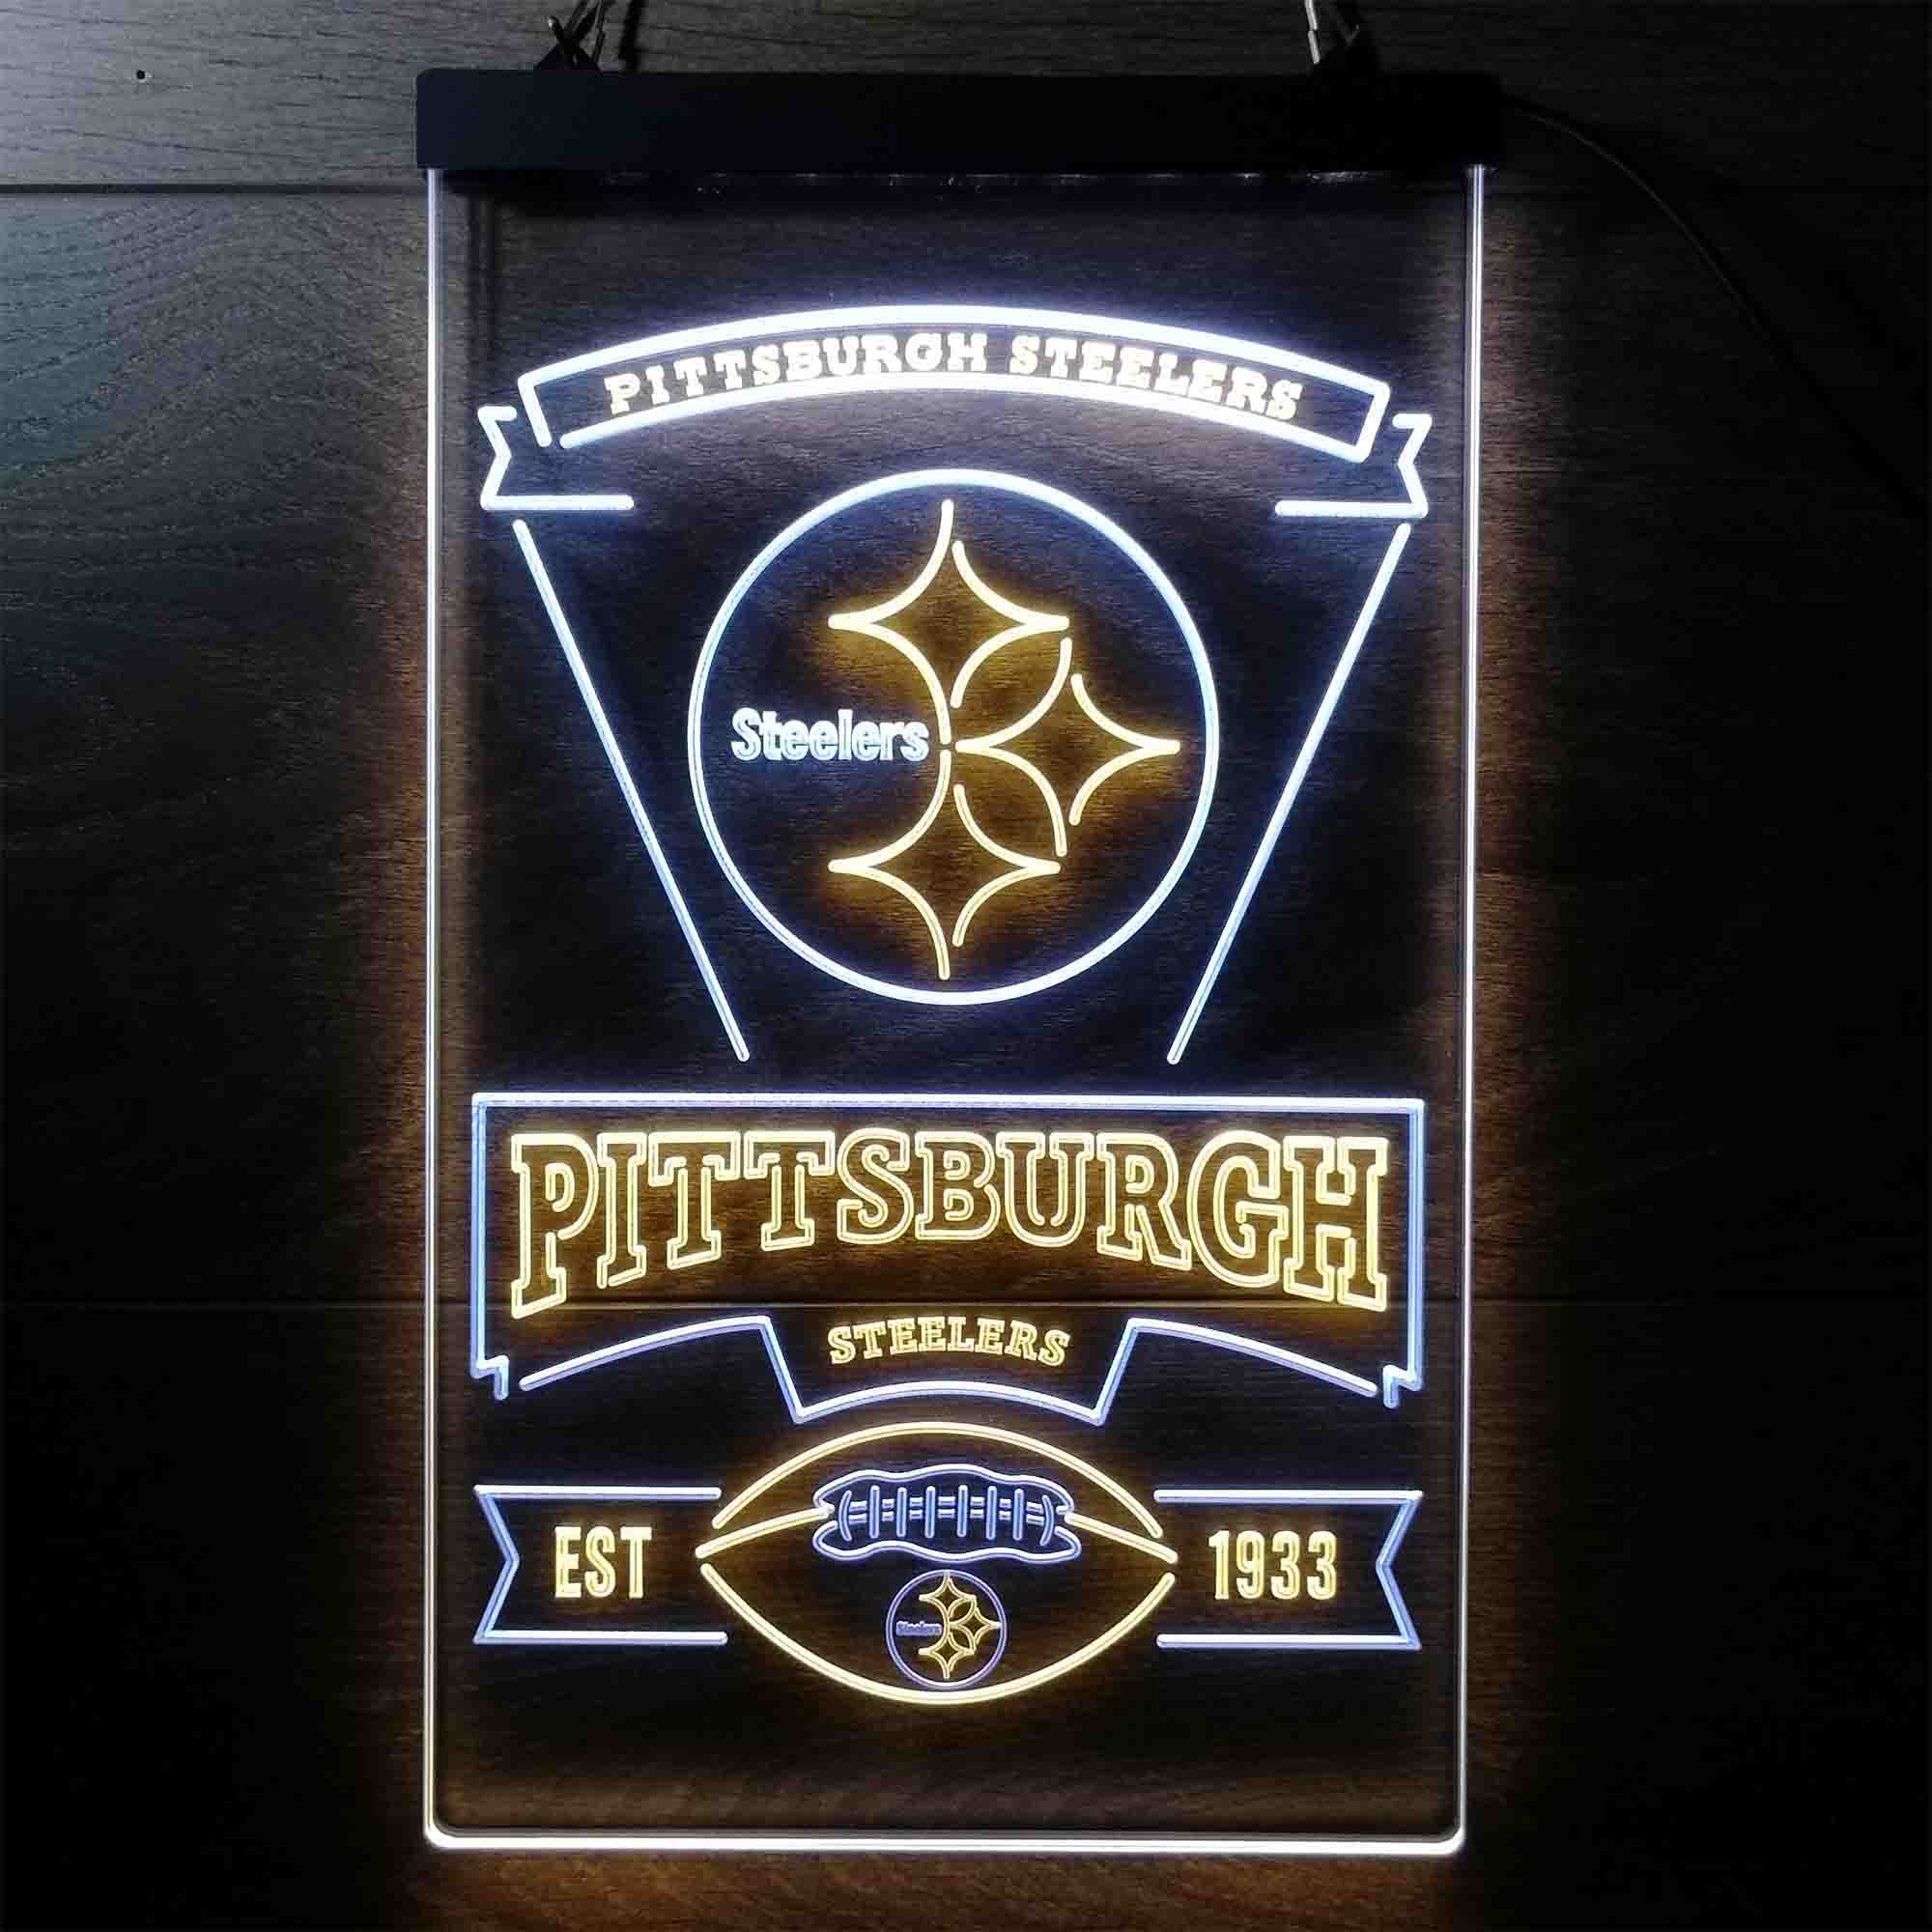 Pittsburgh Steelers Est. 1933 LED Neon Sign